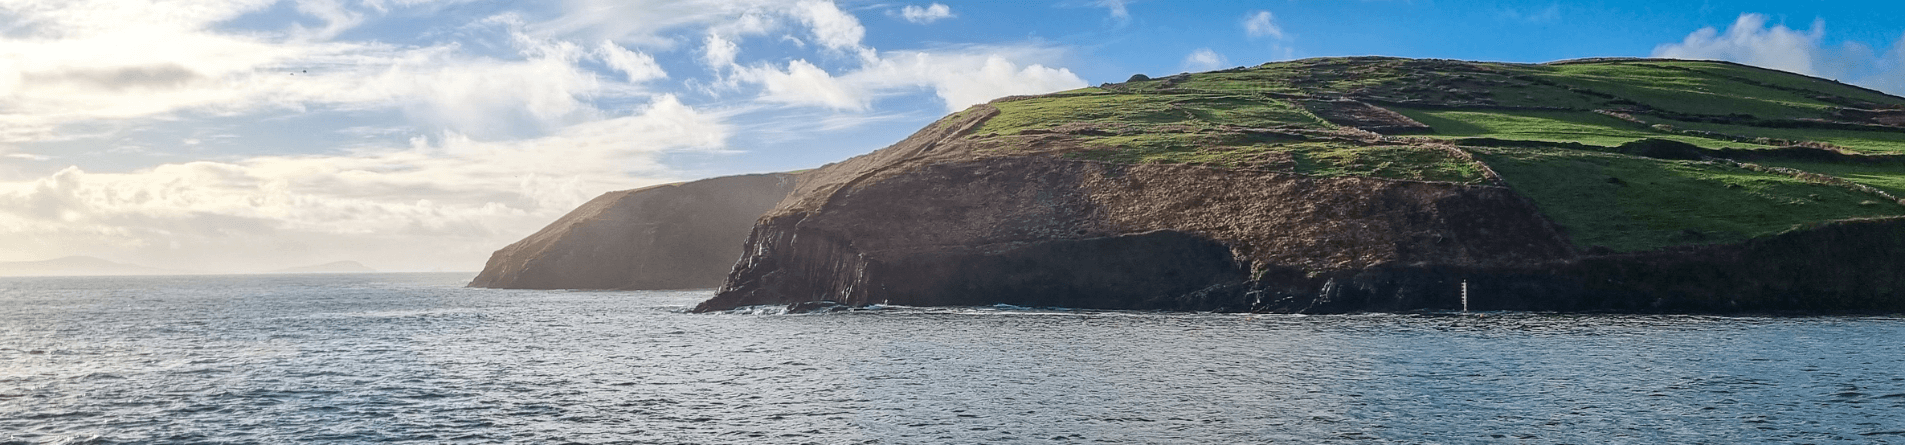 Green cliffs on the edge of dingle bay